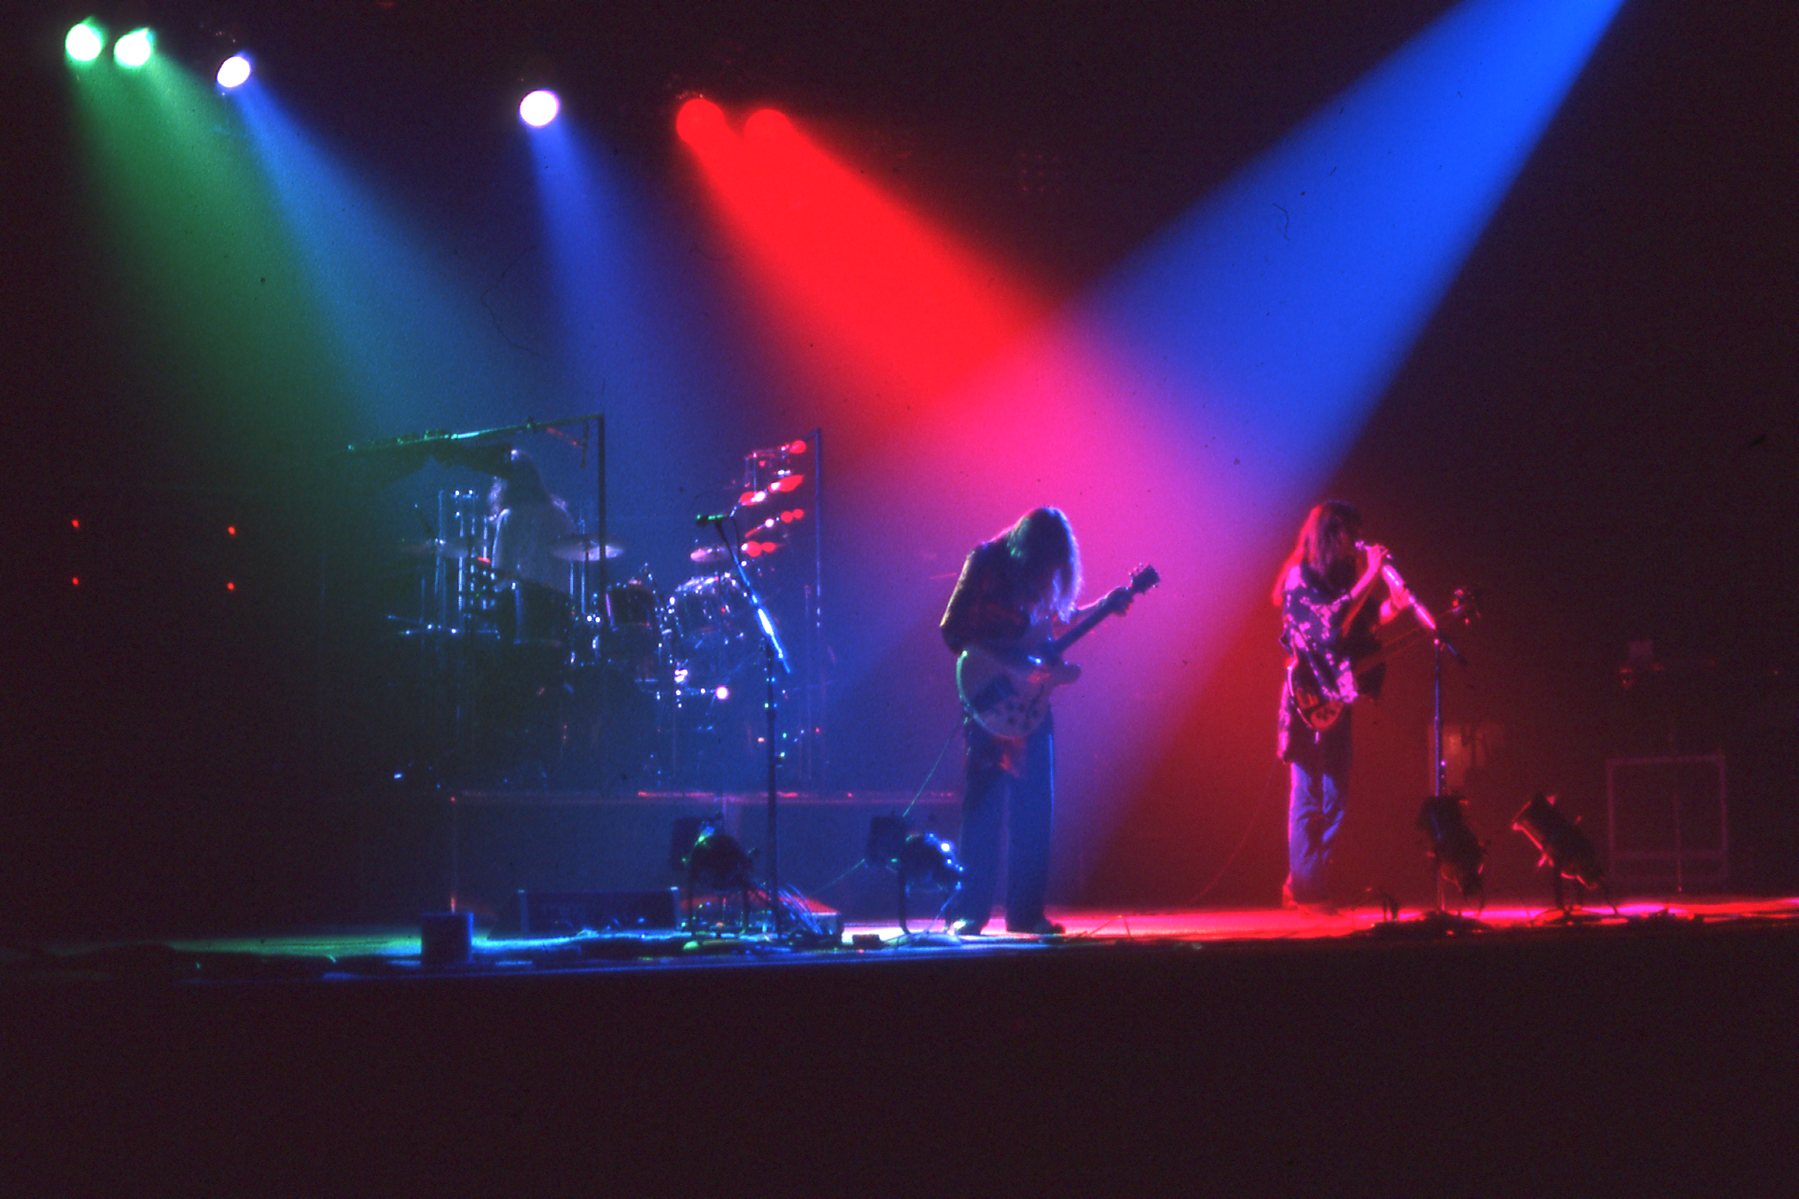 Rush'All The World's a Stage' Tour Pictures - Nelson Center - Springfield, Illinois - May 15th, 1977